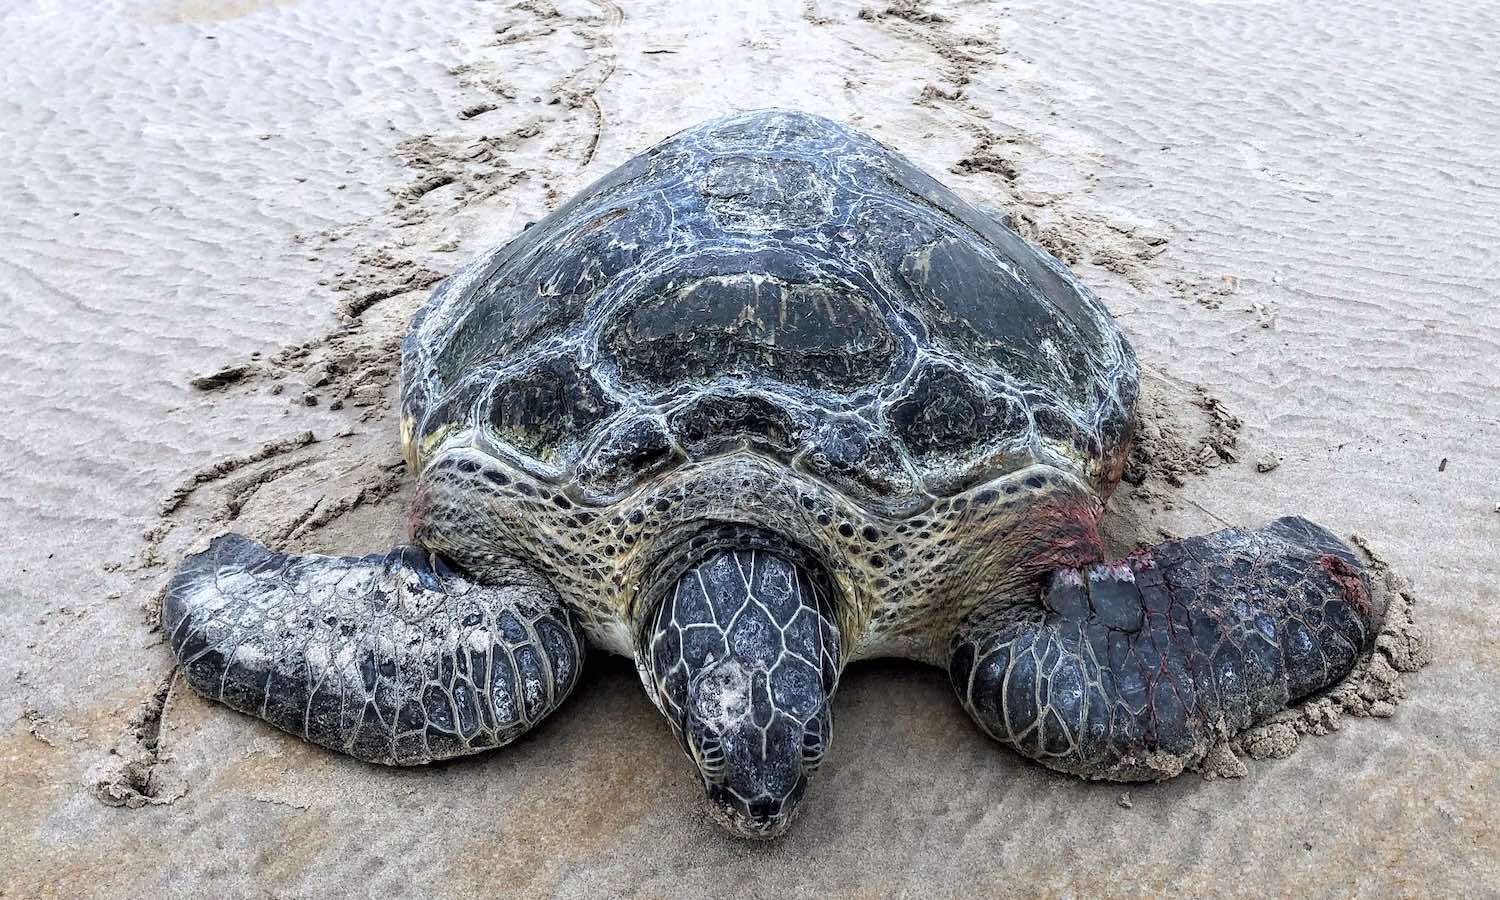 A green sea turtle on a beach and facing the camera.